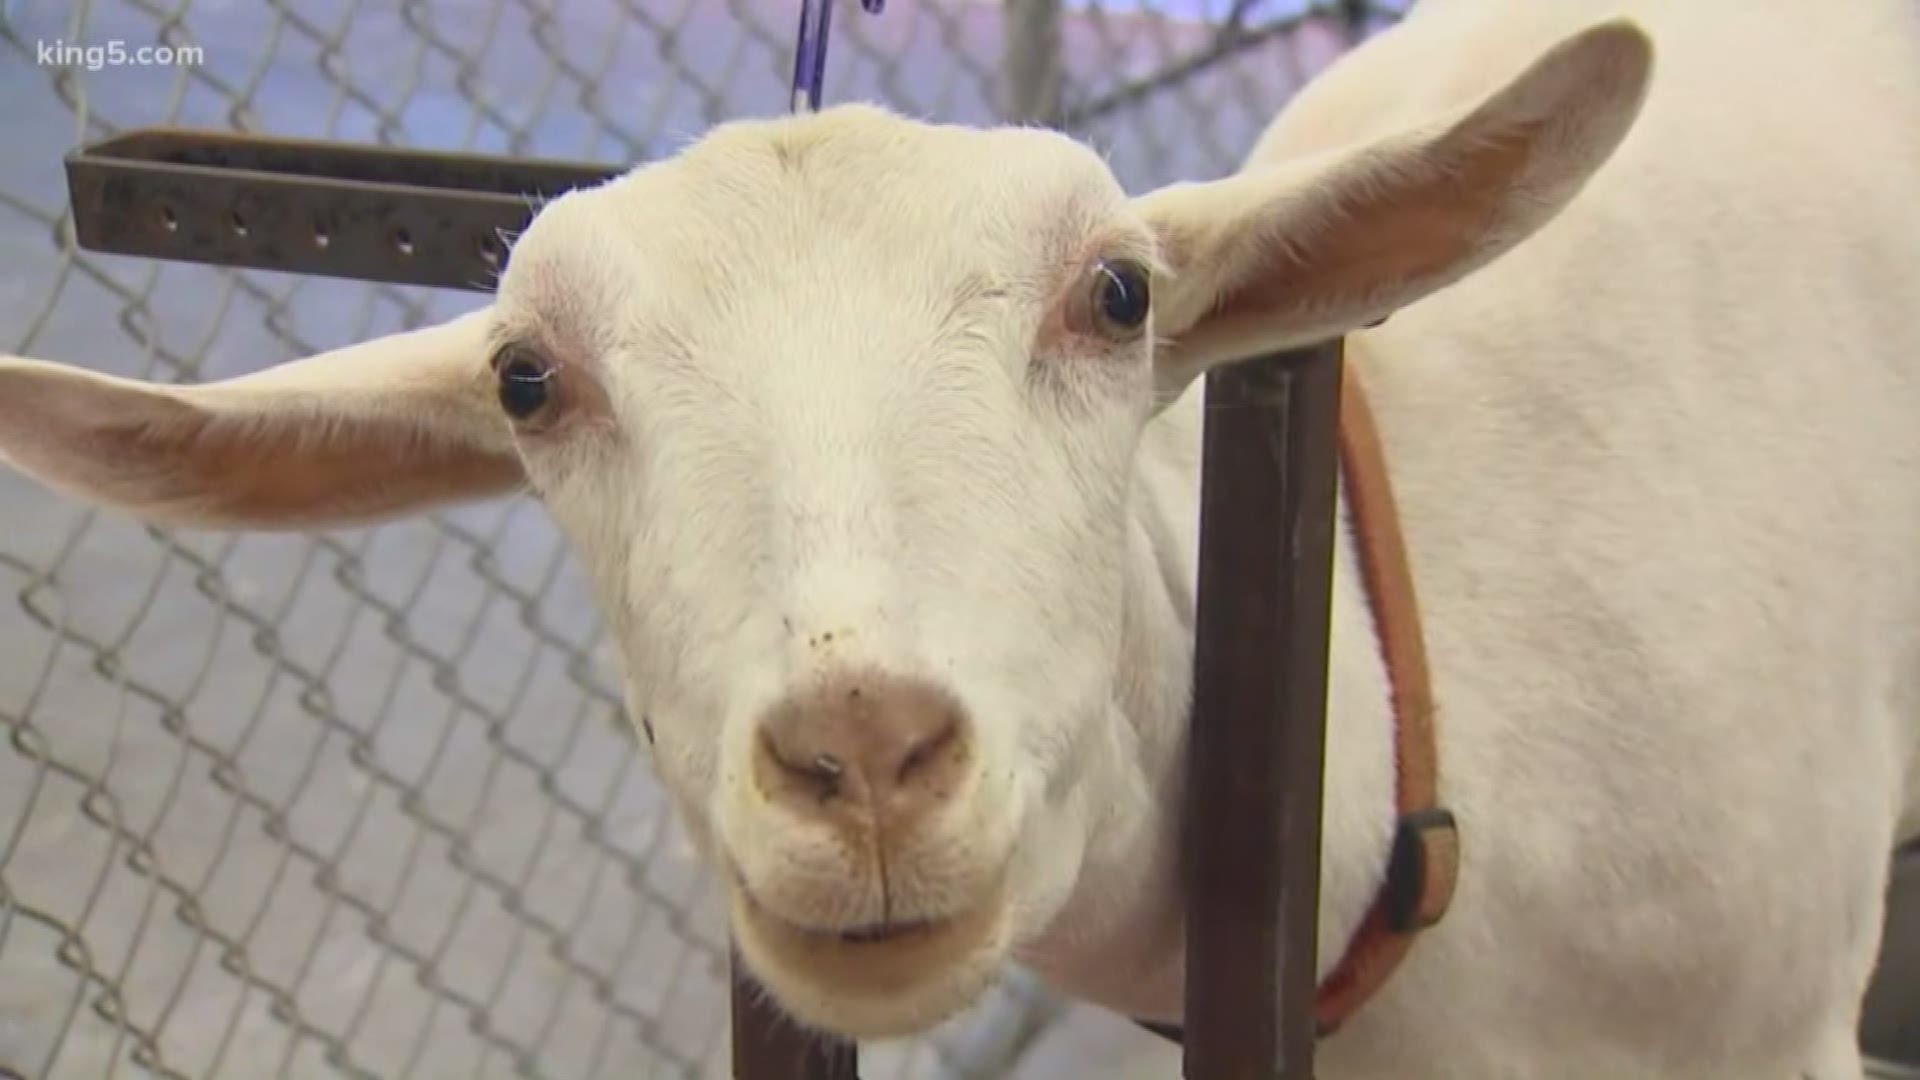 Competition goats and their young handlers are ready to strut their stuff at Washington's state fair.